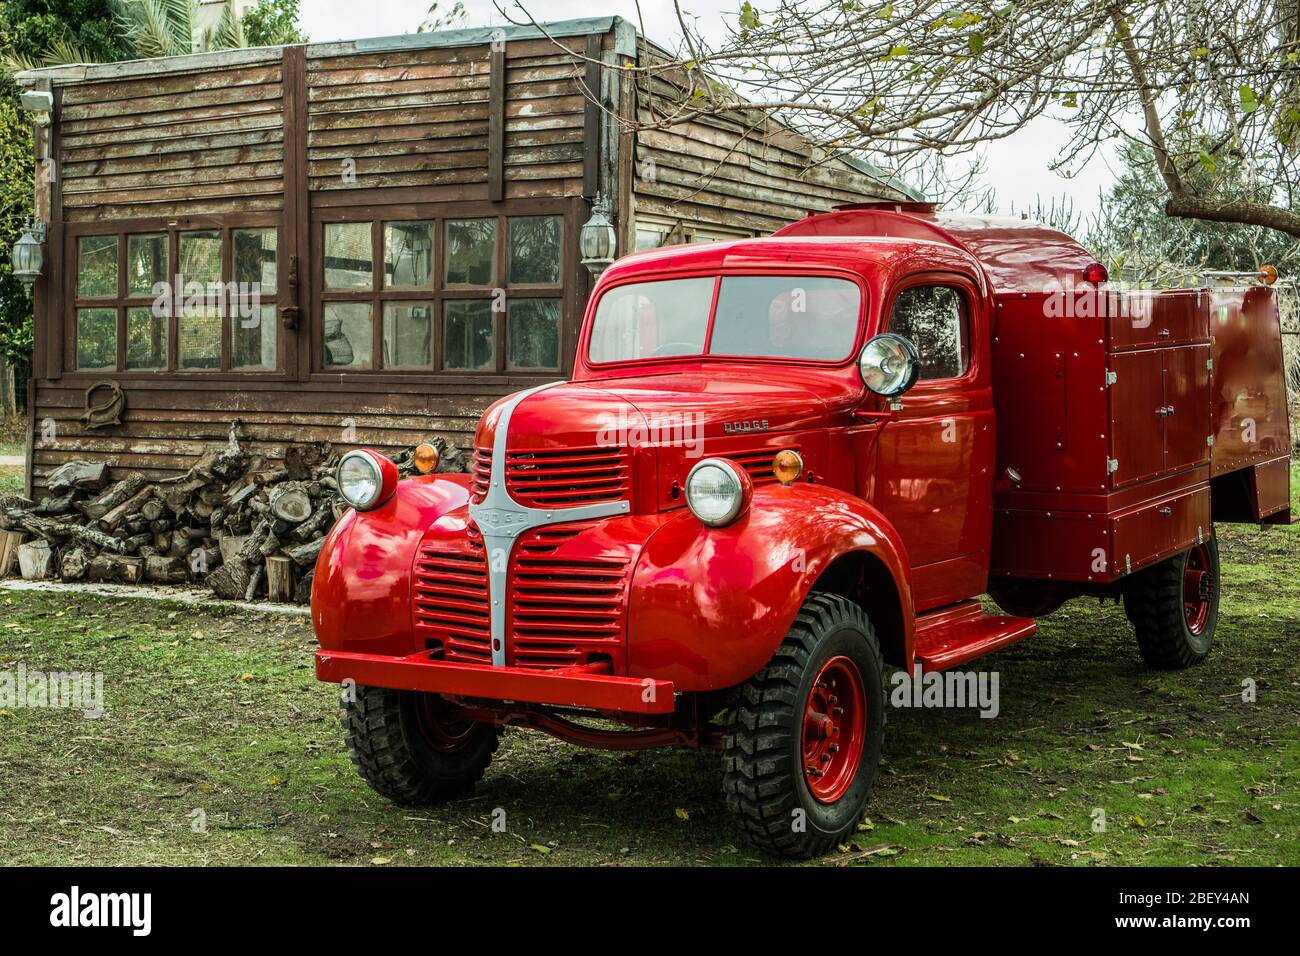 1943 red Dodge fire truck Stock Photo